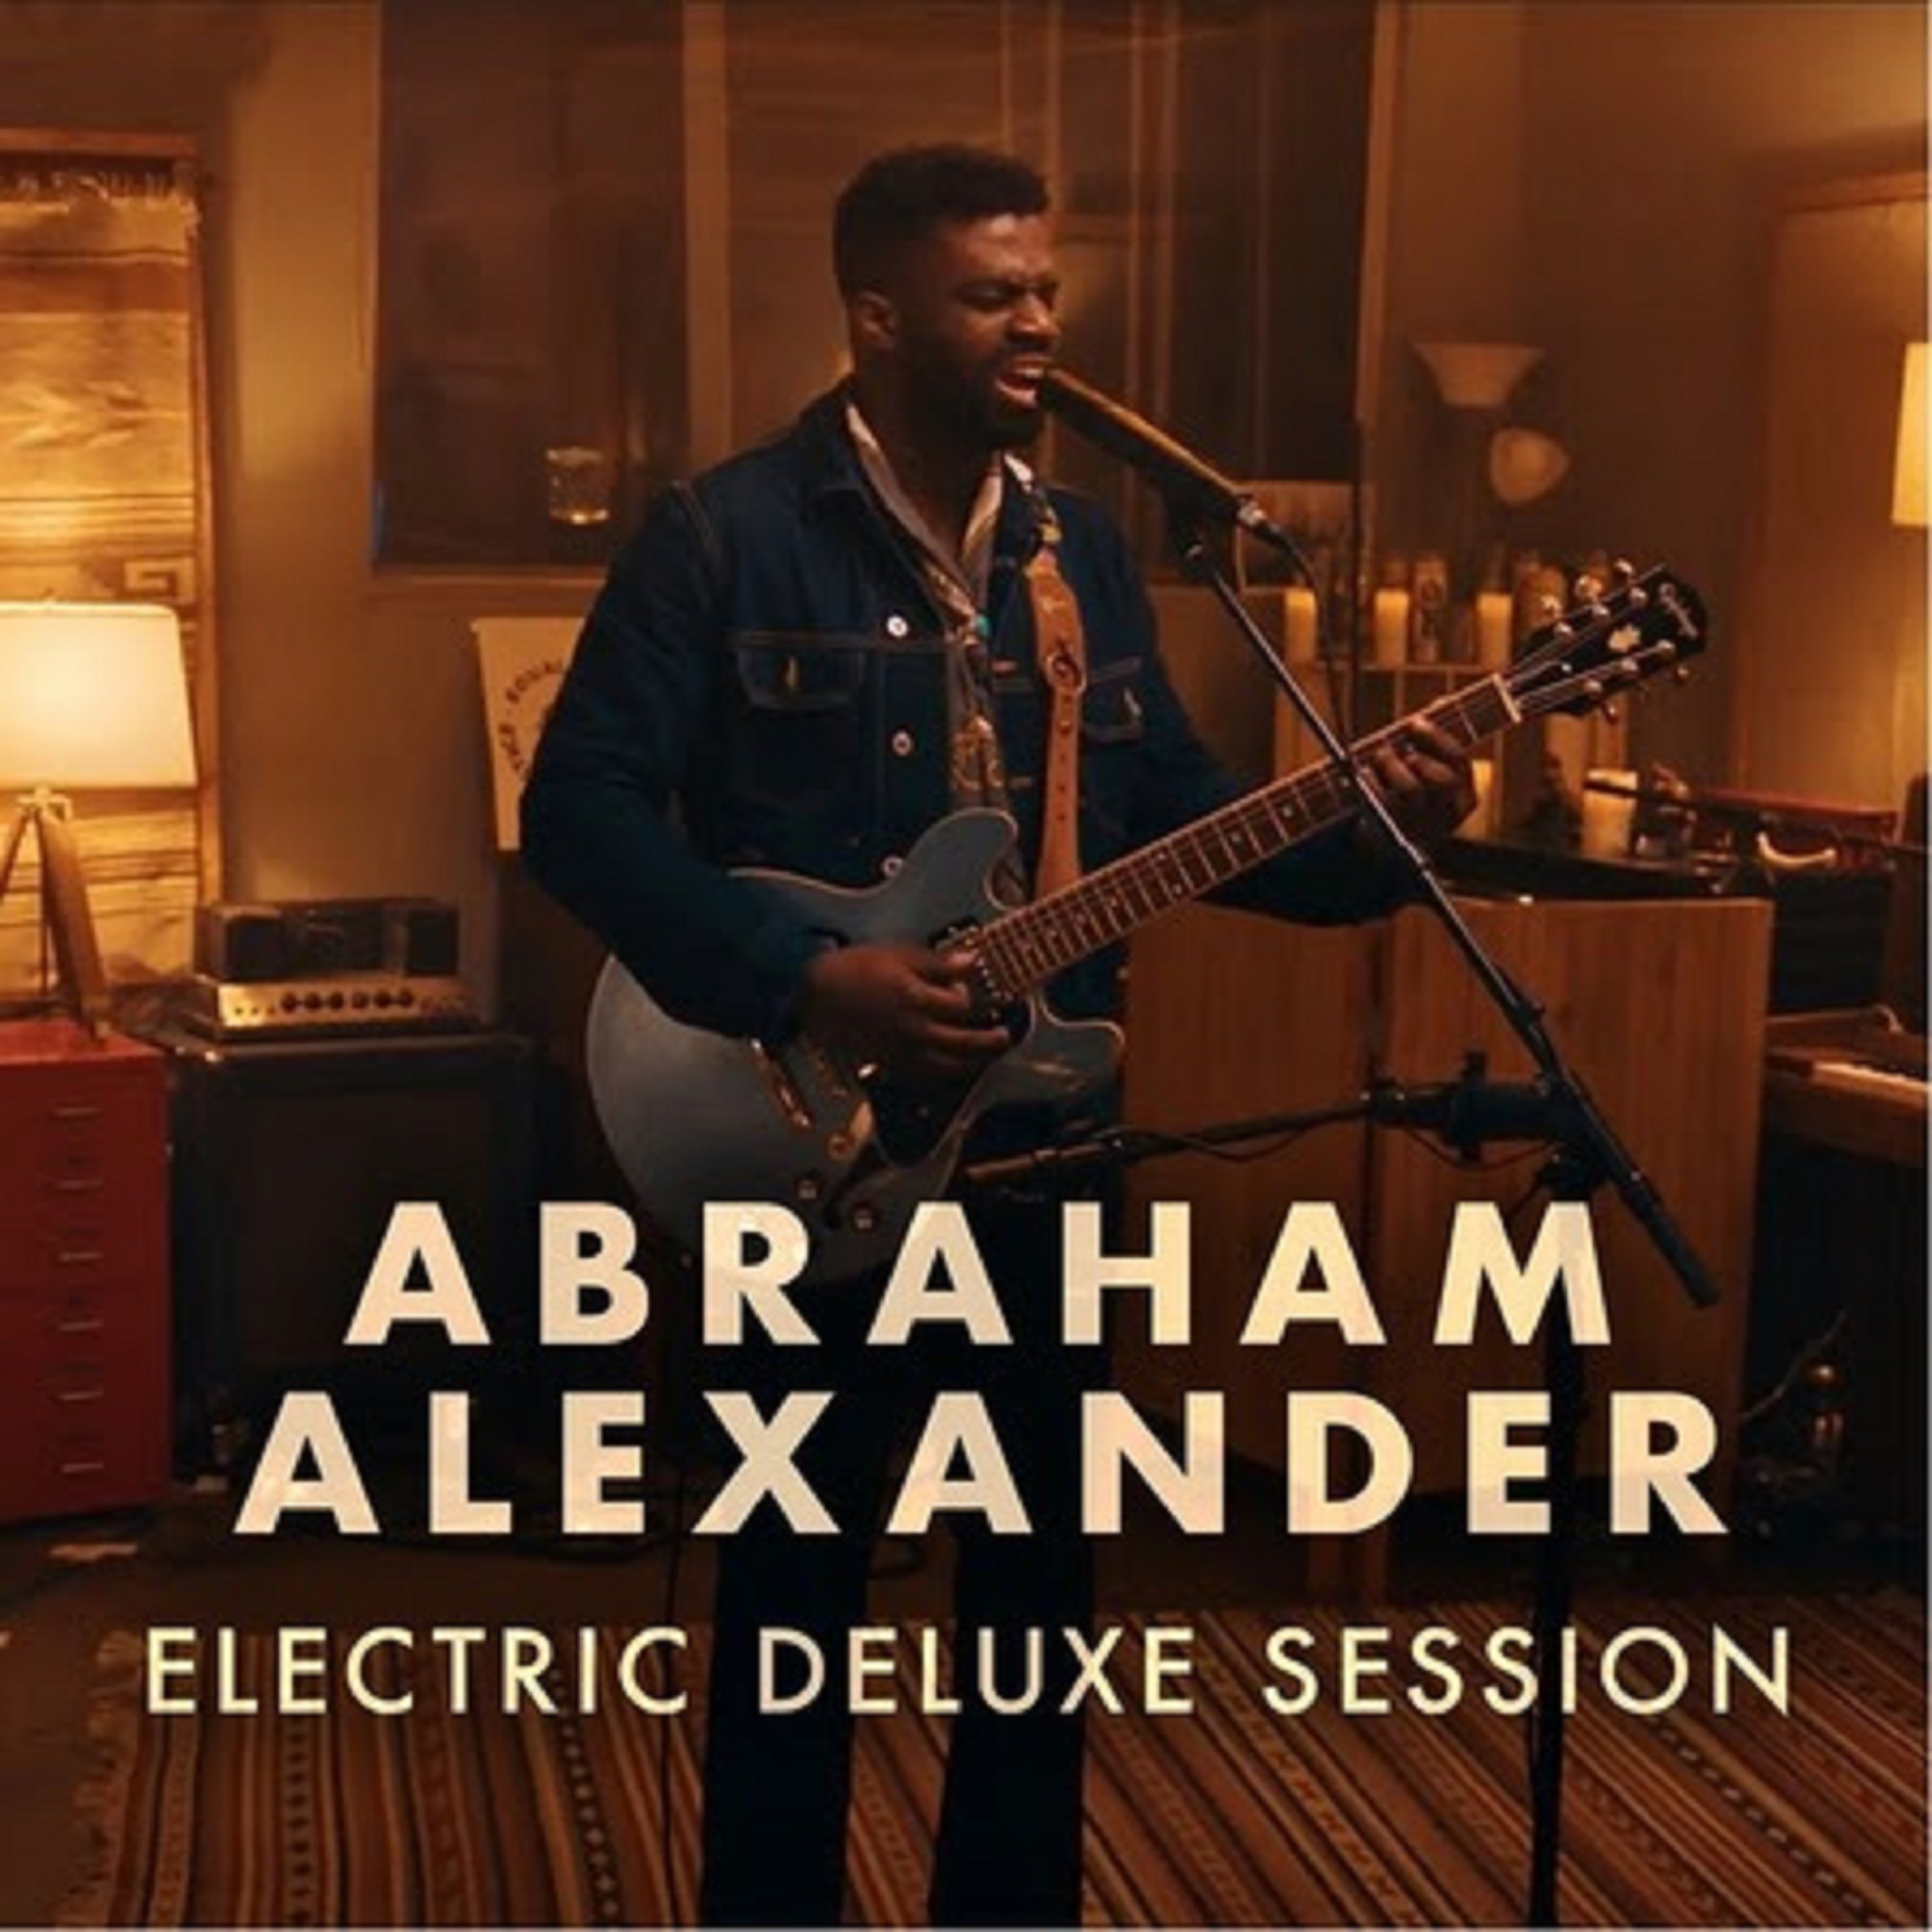 Abraham Alexander's 'Electric Deluxe Sessions' EP out today